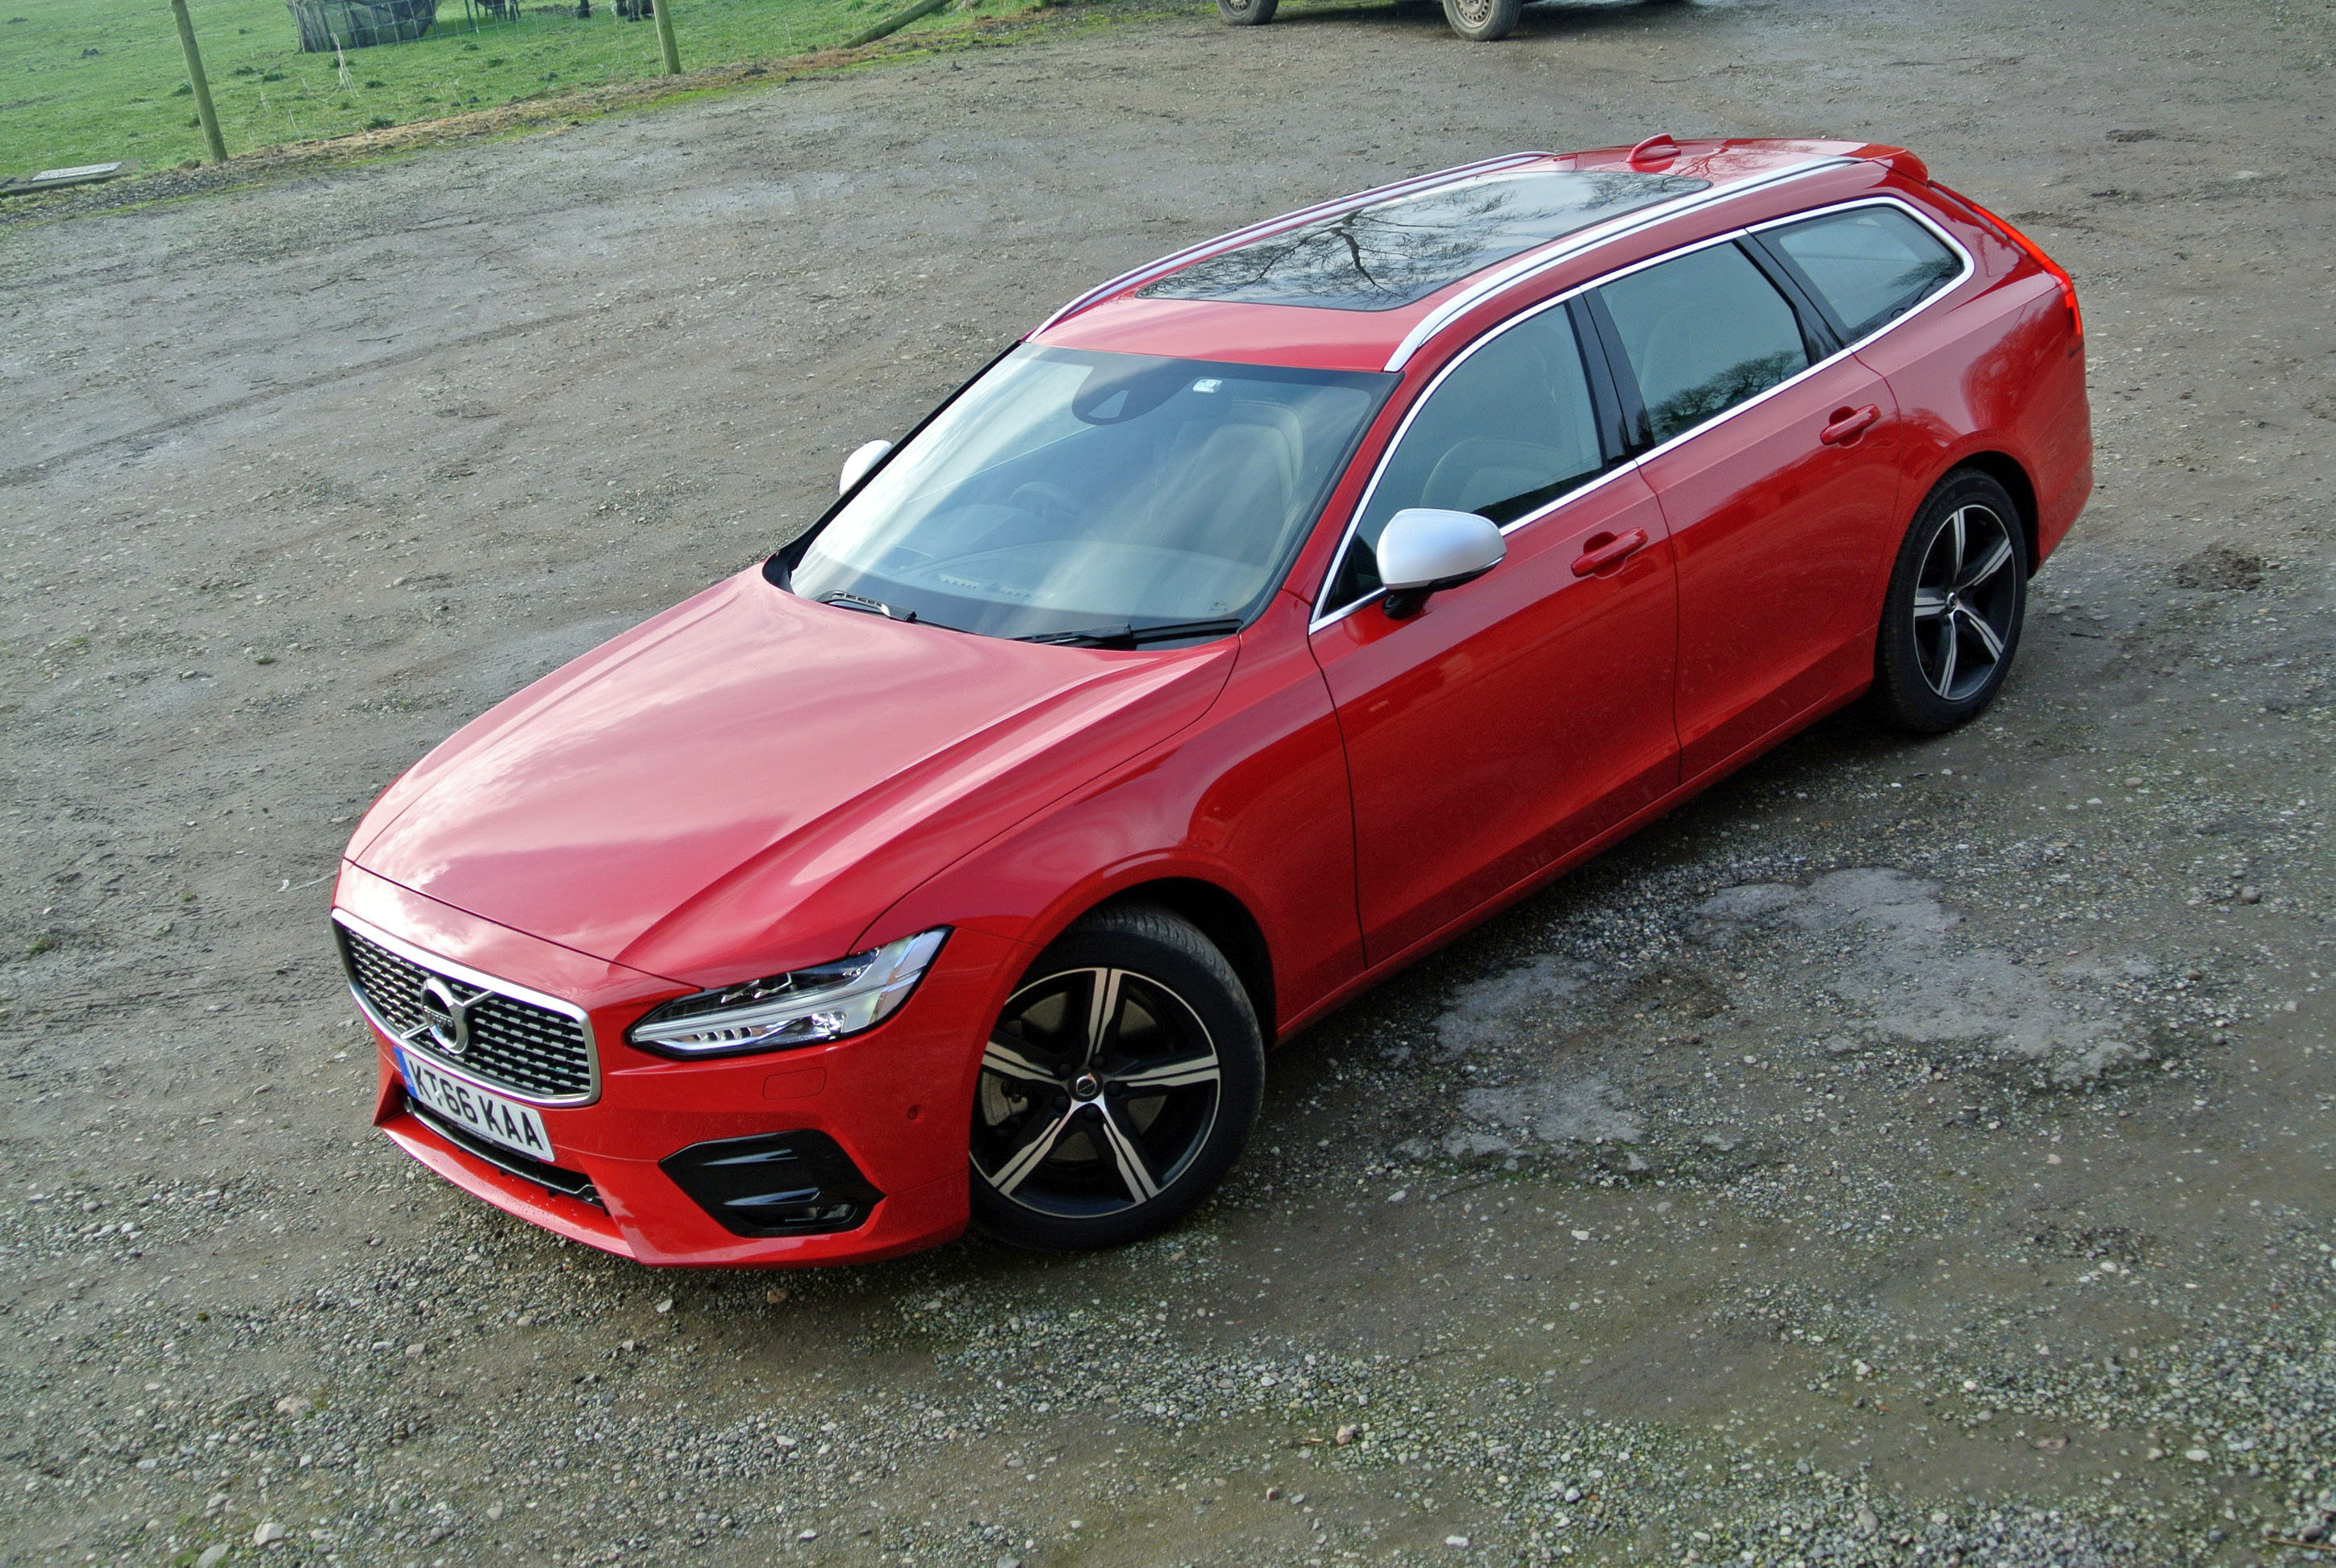 R-Design and Cross Country variants now added to Volvo range